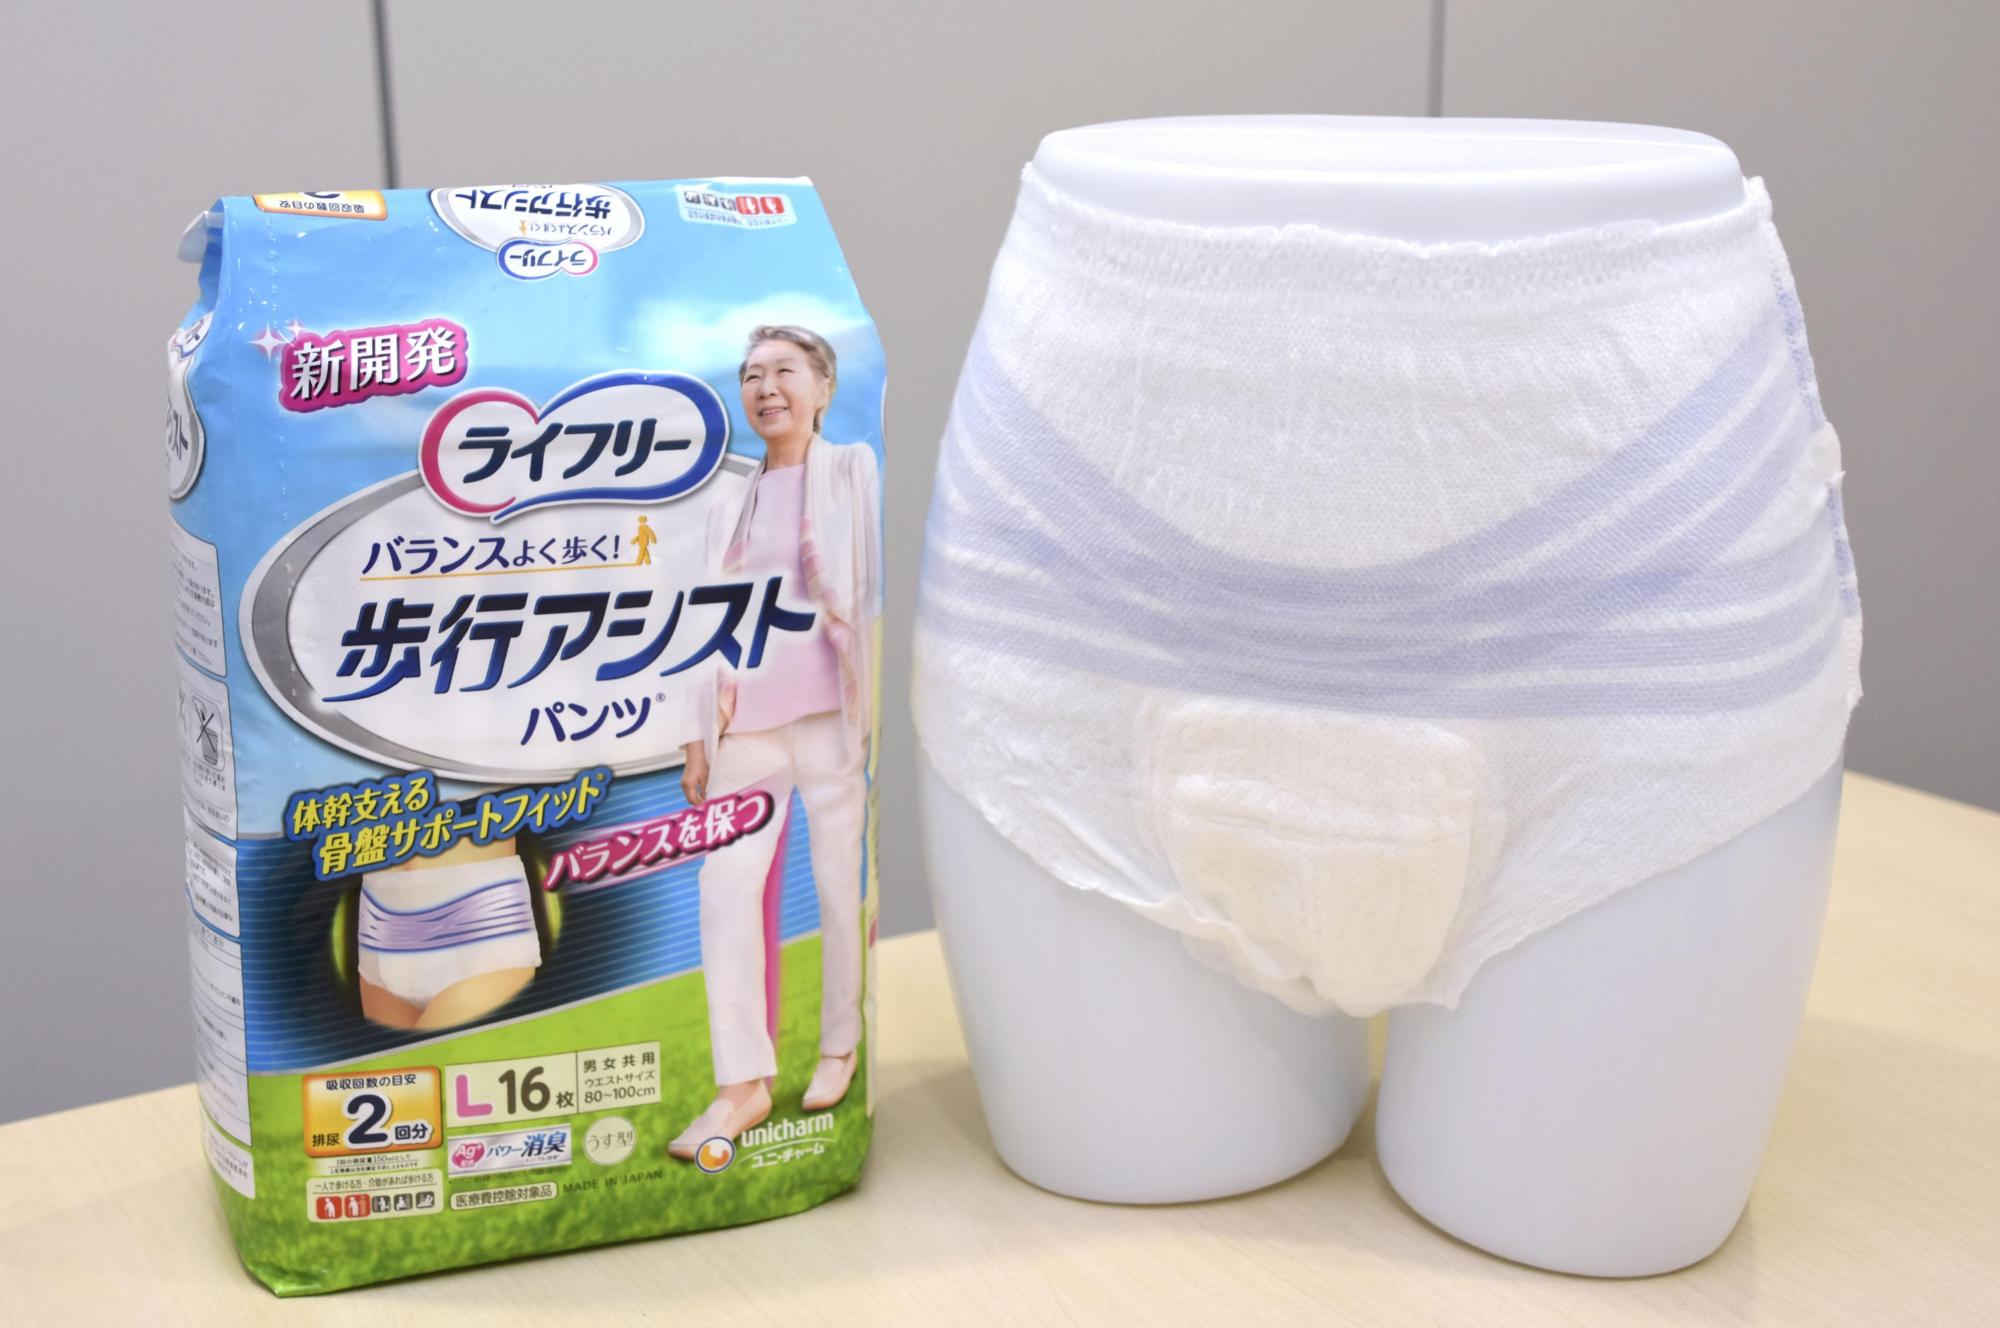 Japan's Unicharm develops world's first diapers for elderly with